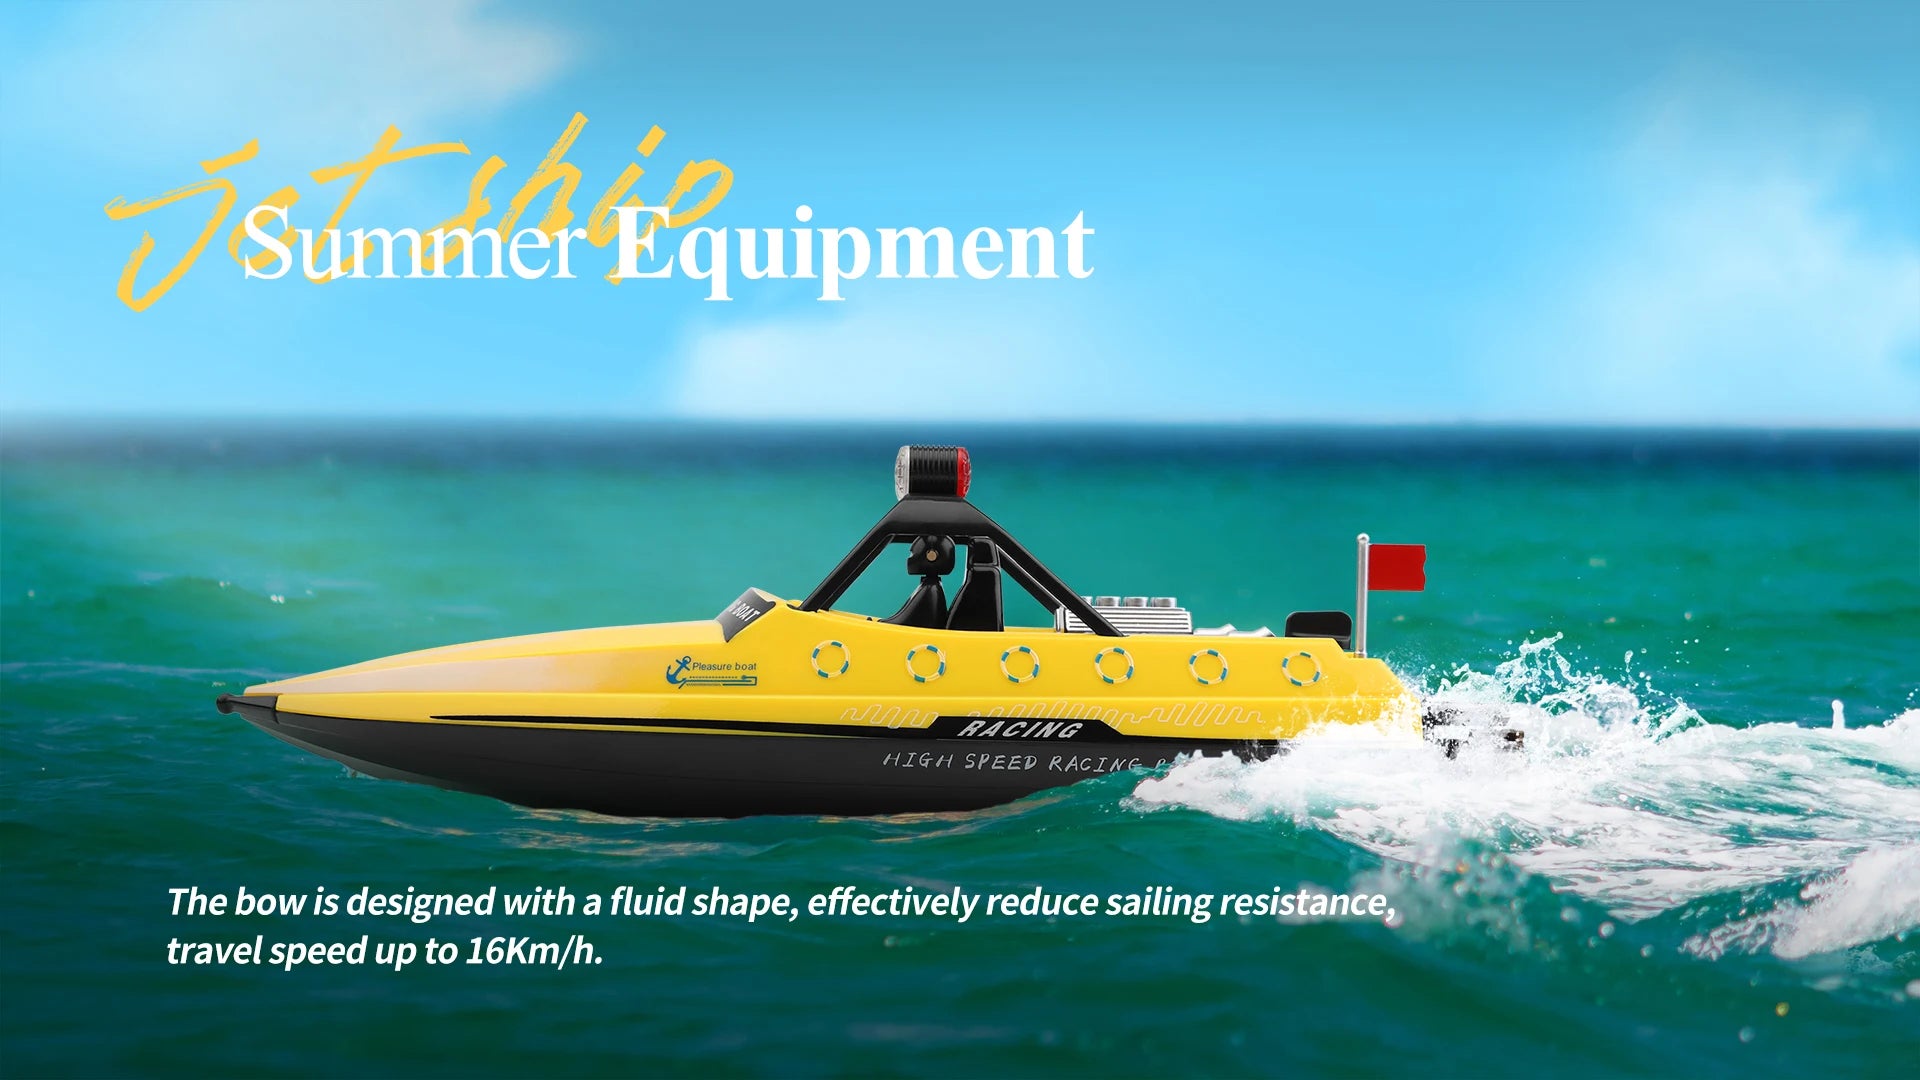 Wltoys WL917 Boat, the bow is designed with a fluid shape, effectively reduce sailing resistance . travel speed up